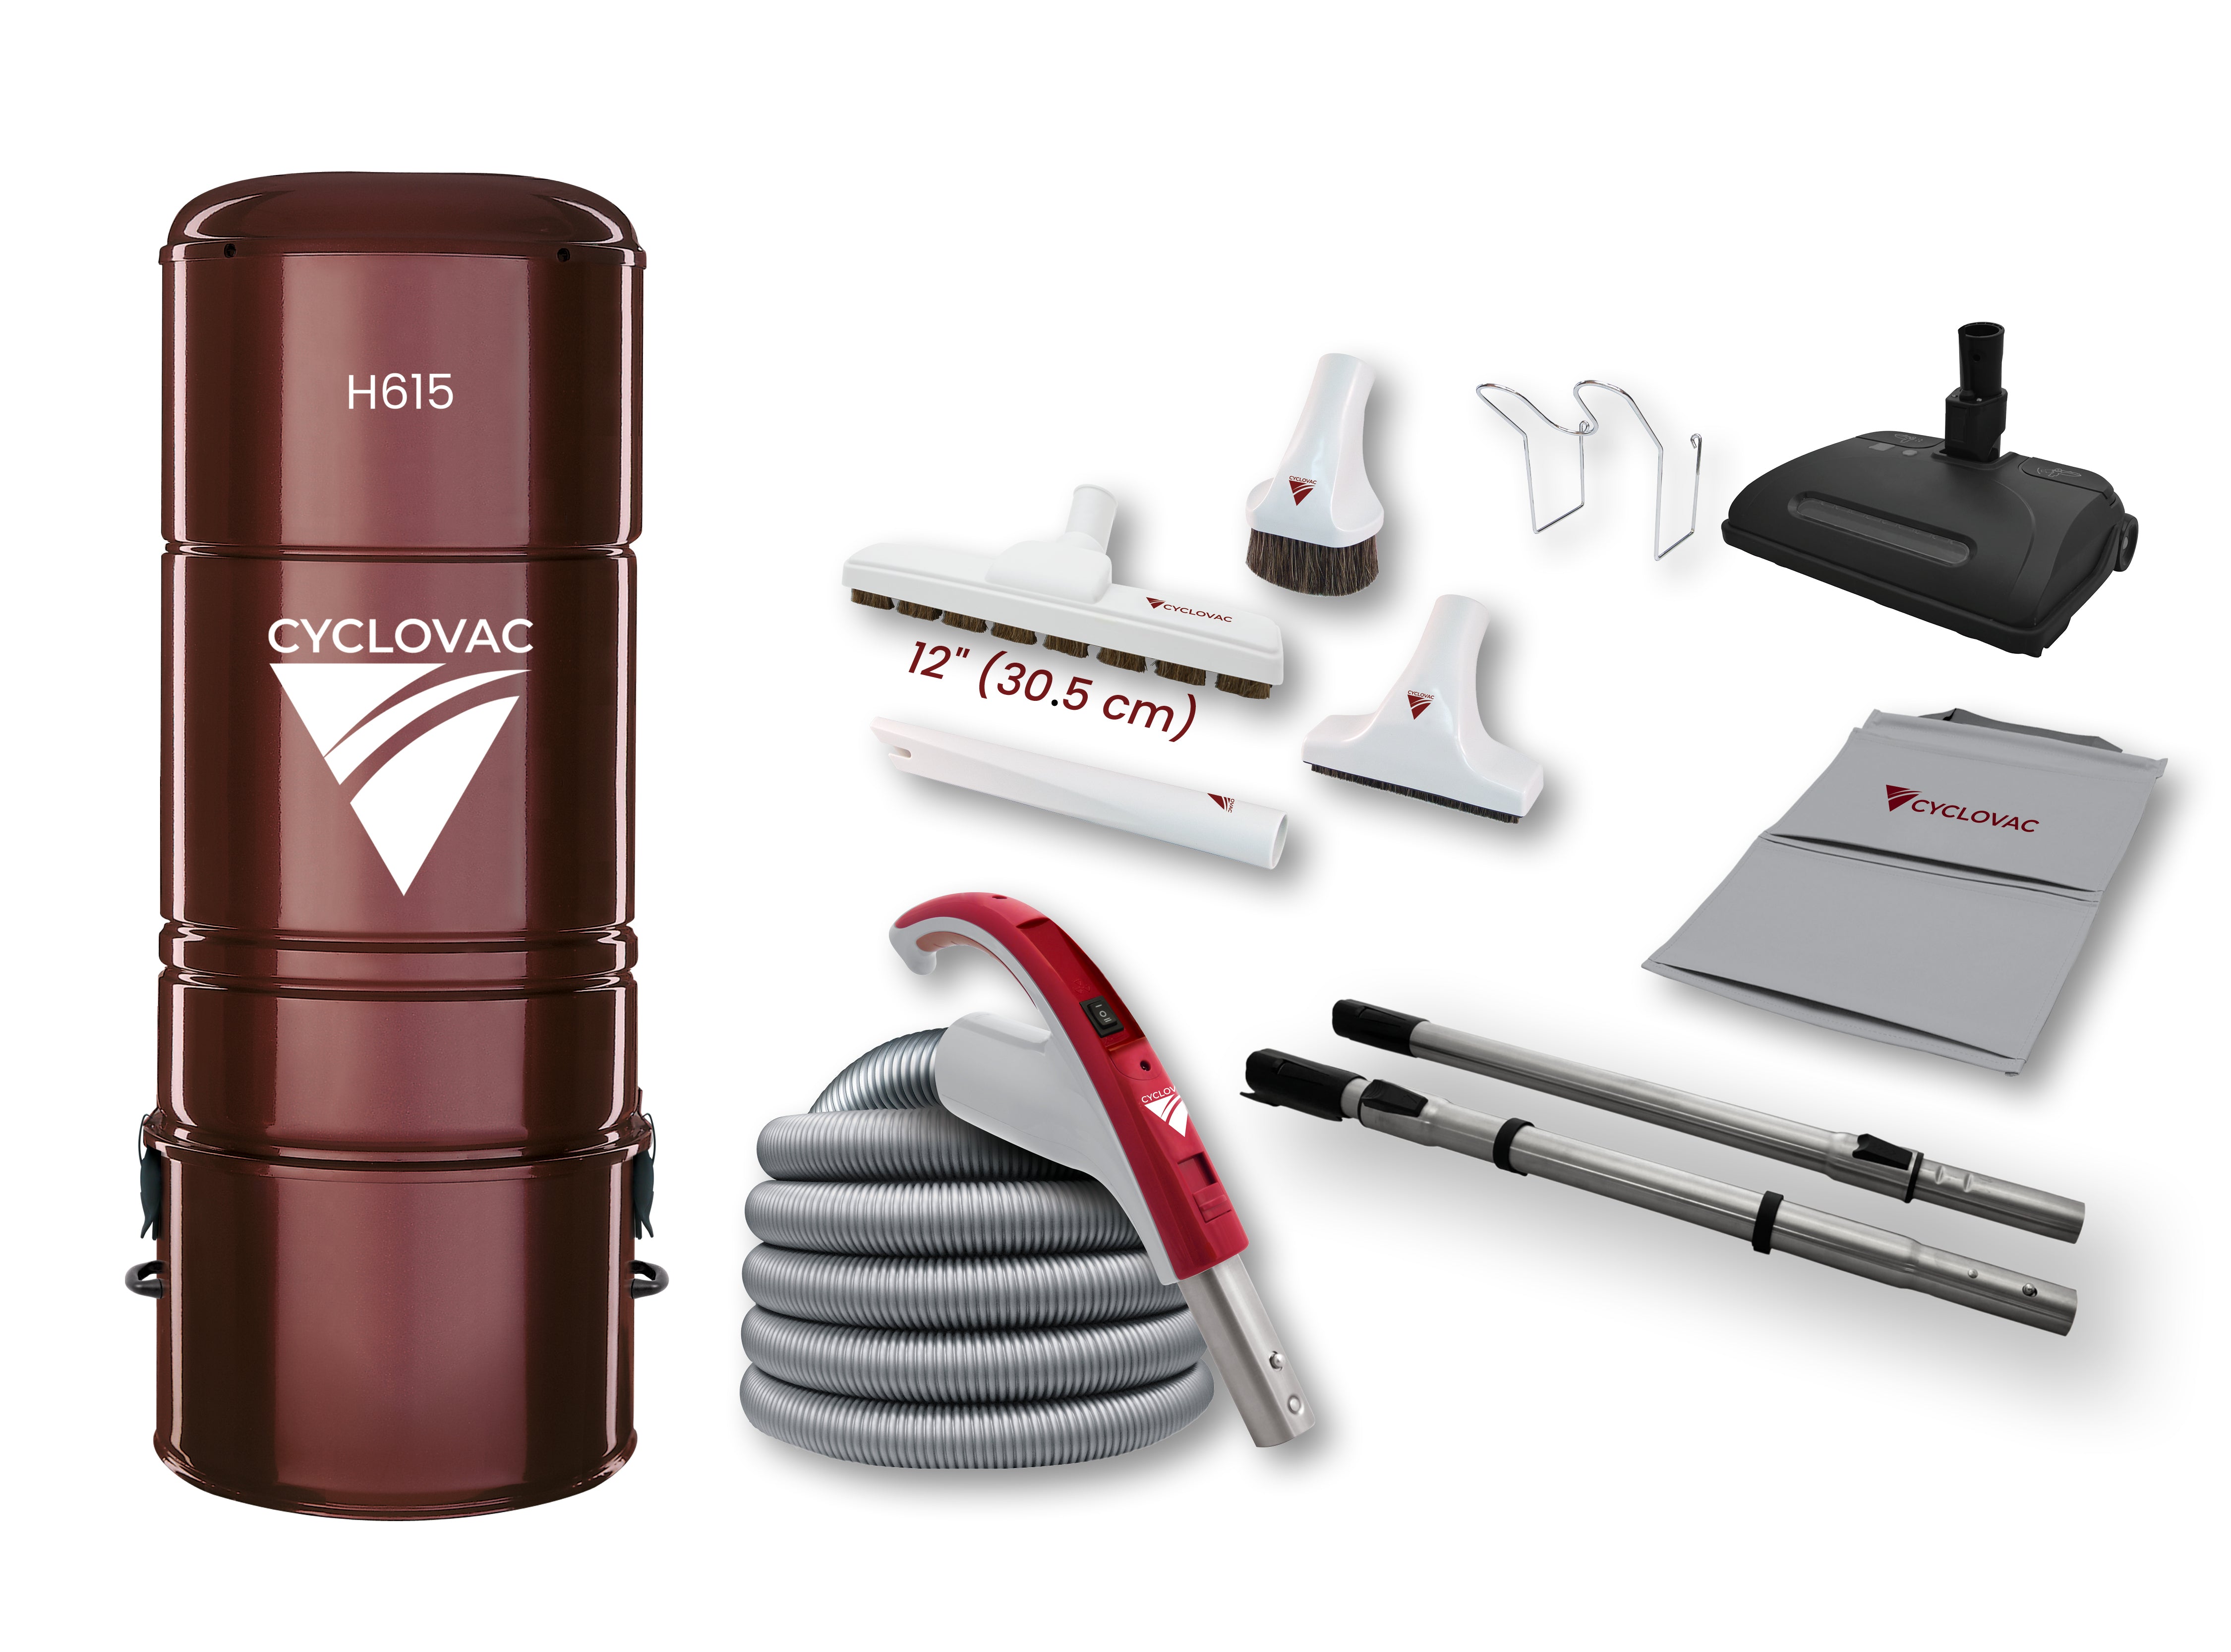 Cyclovac H615 Central Vacuum Canister with Super Luxe Brush Kit & Electric Power Nozzle